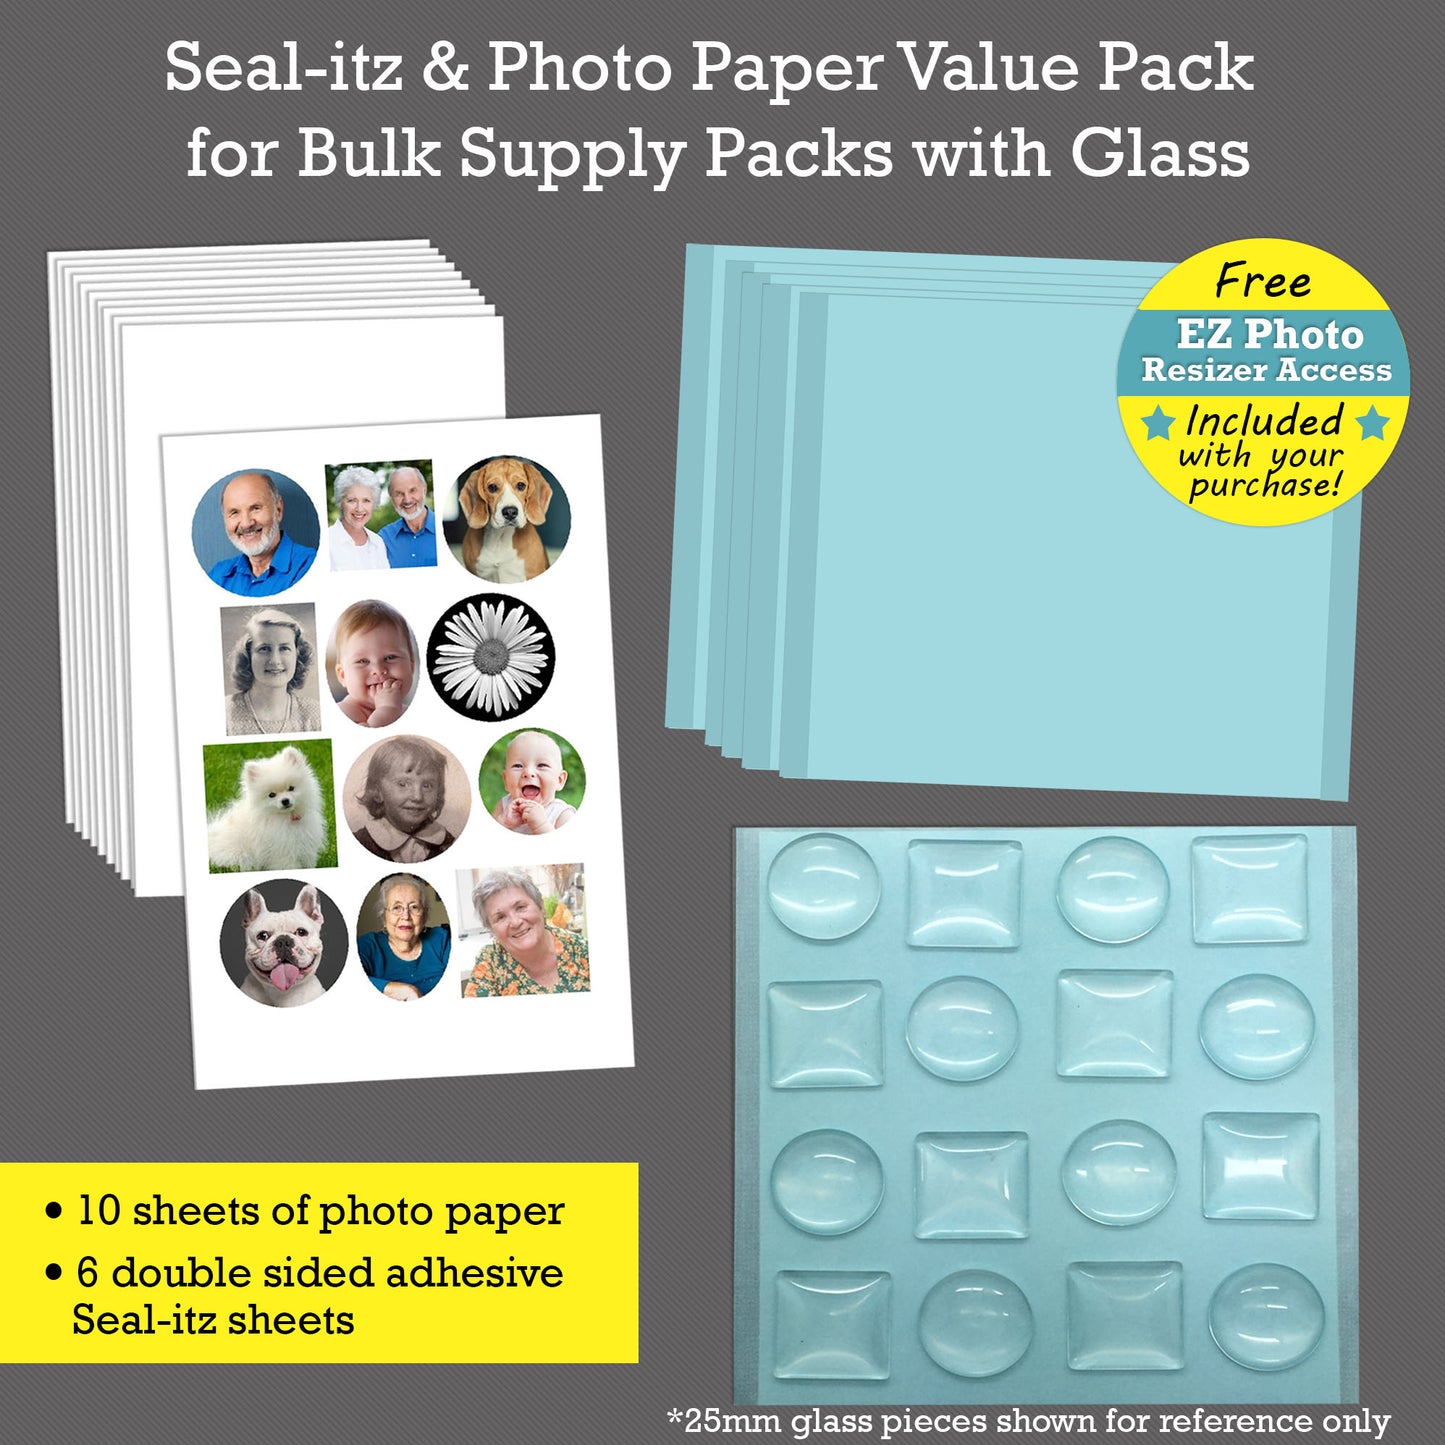 Seal-itz & Photo Paper Special Value Pack for Bulk Supply Packs with Glass